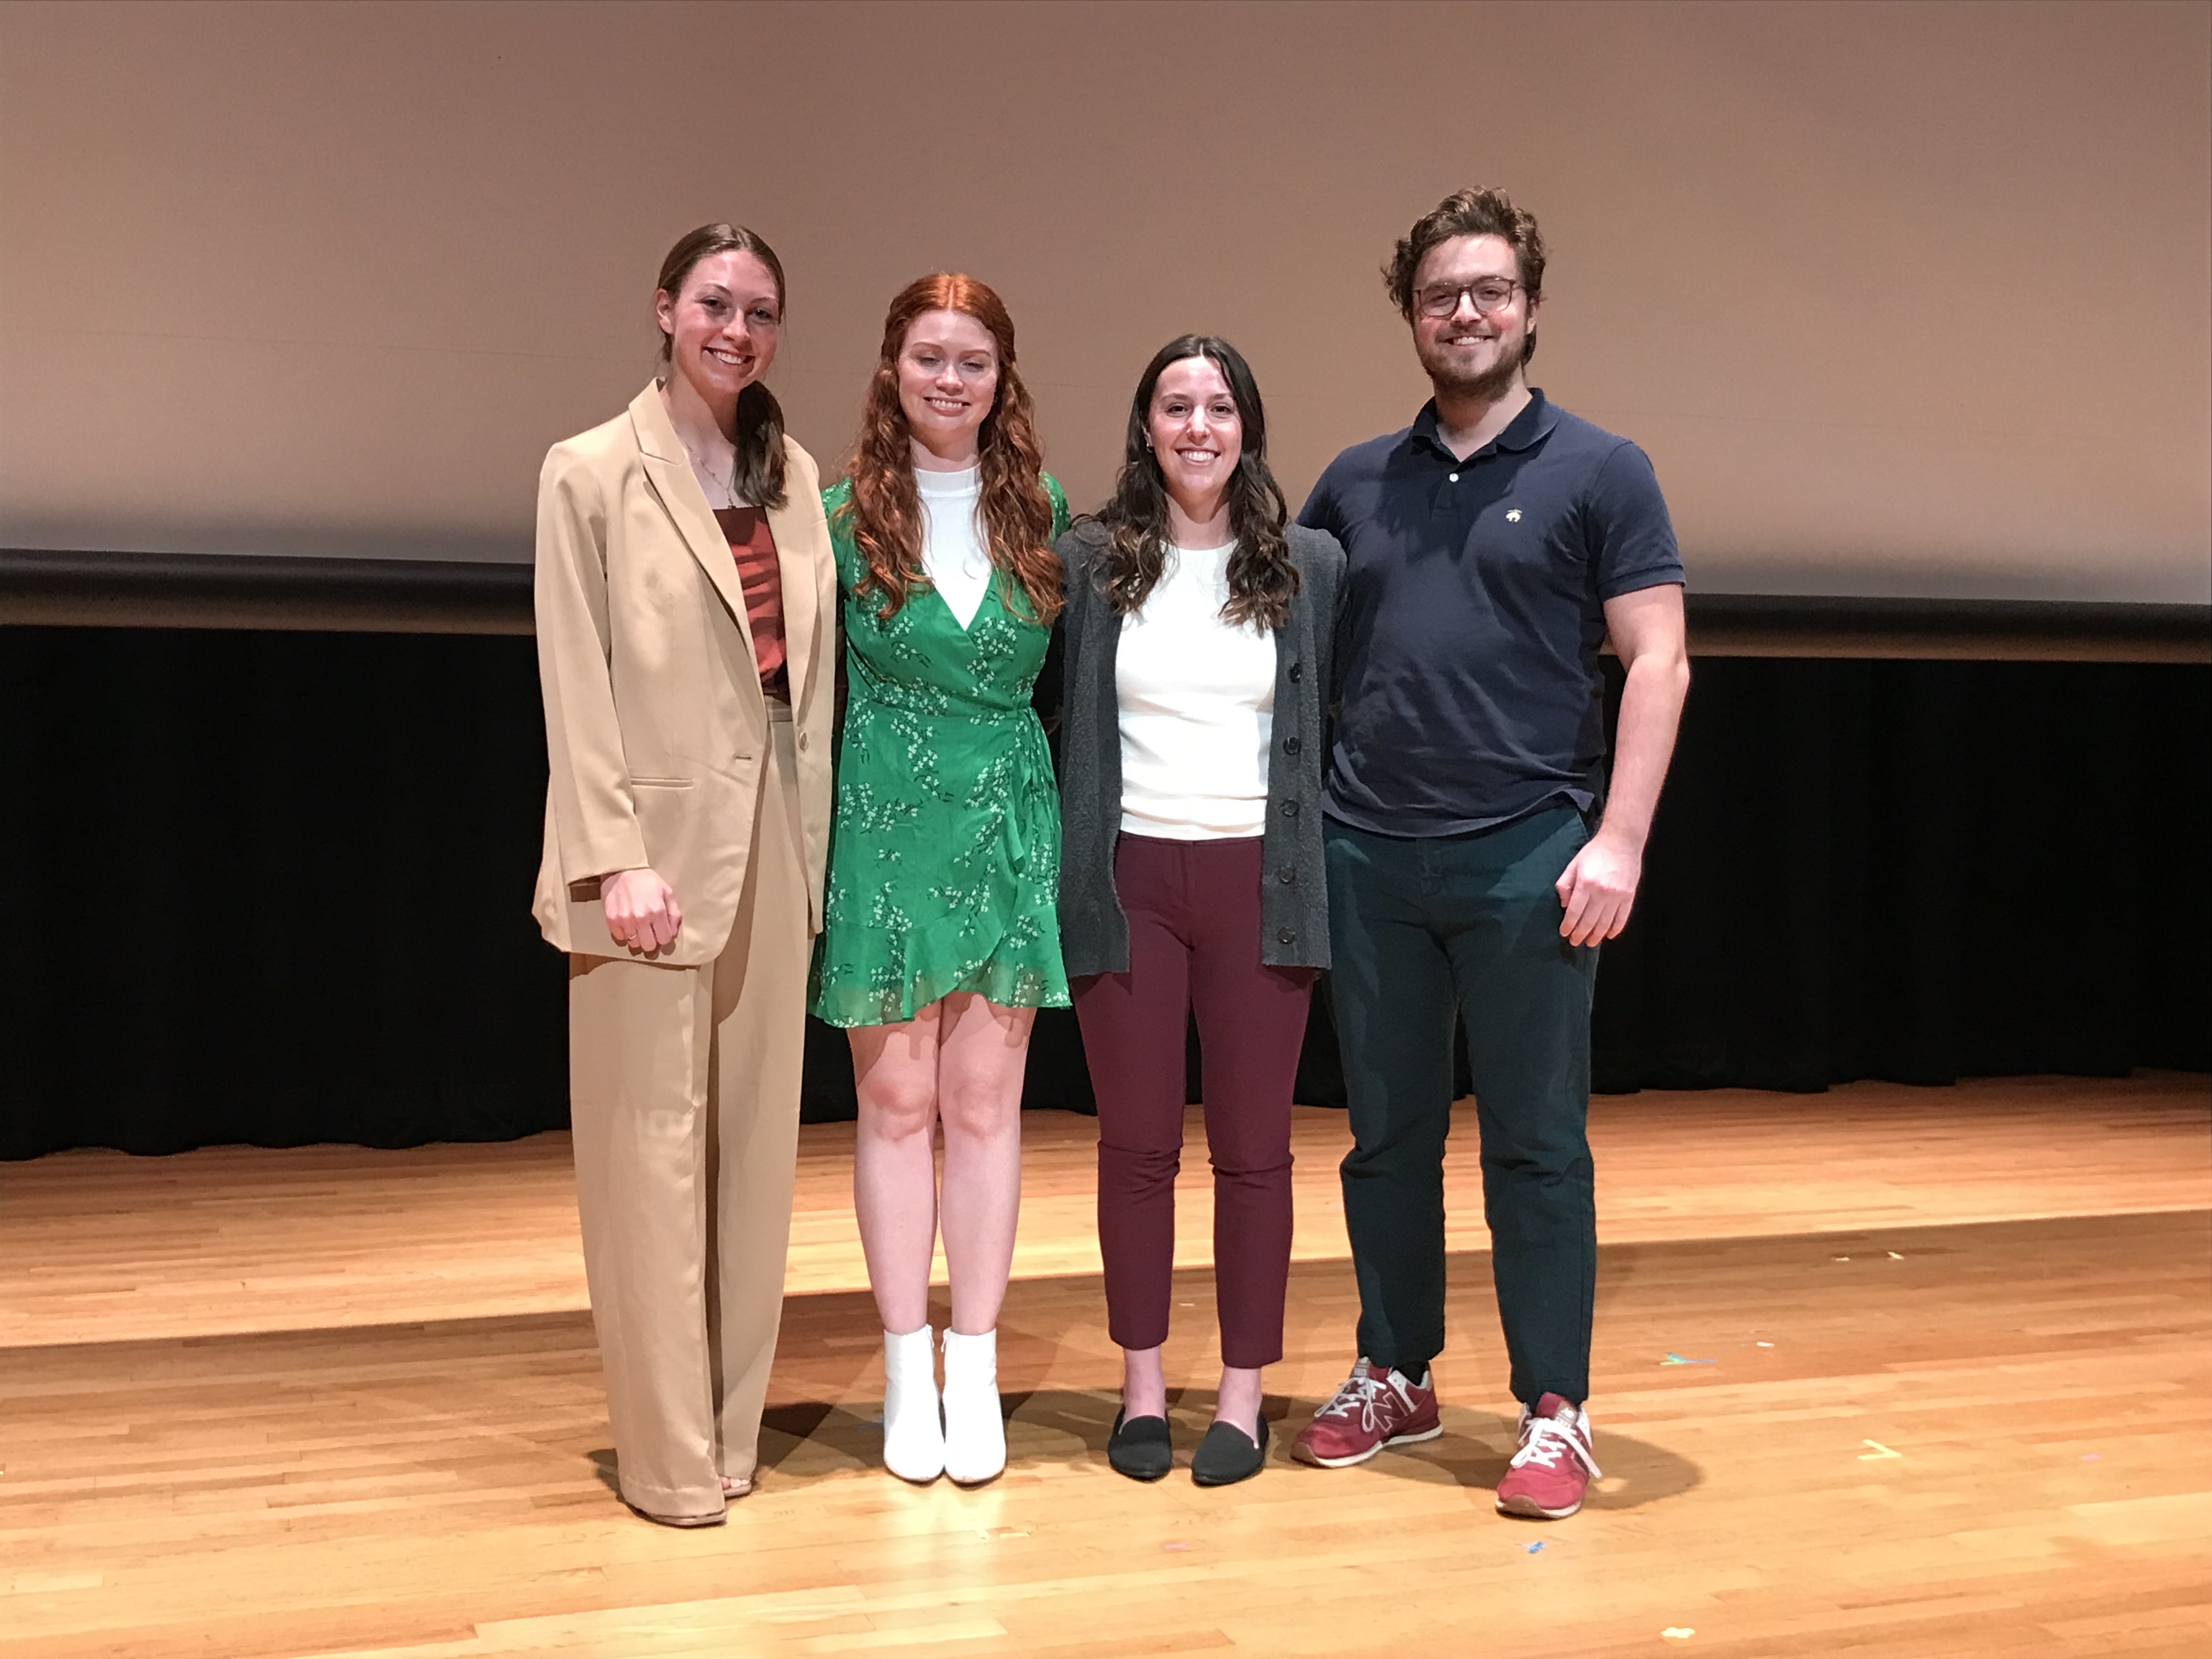 Pictured: 3MT honors showcase participants, left to right, Caroline Donovan, Anthropology; Lilly Pope, Public Policy; Kenzi Fergus, Neuroscience; Carter Prillaman, Biology